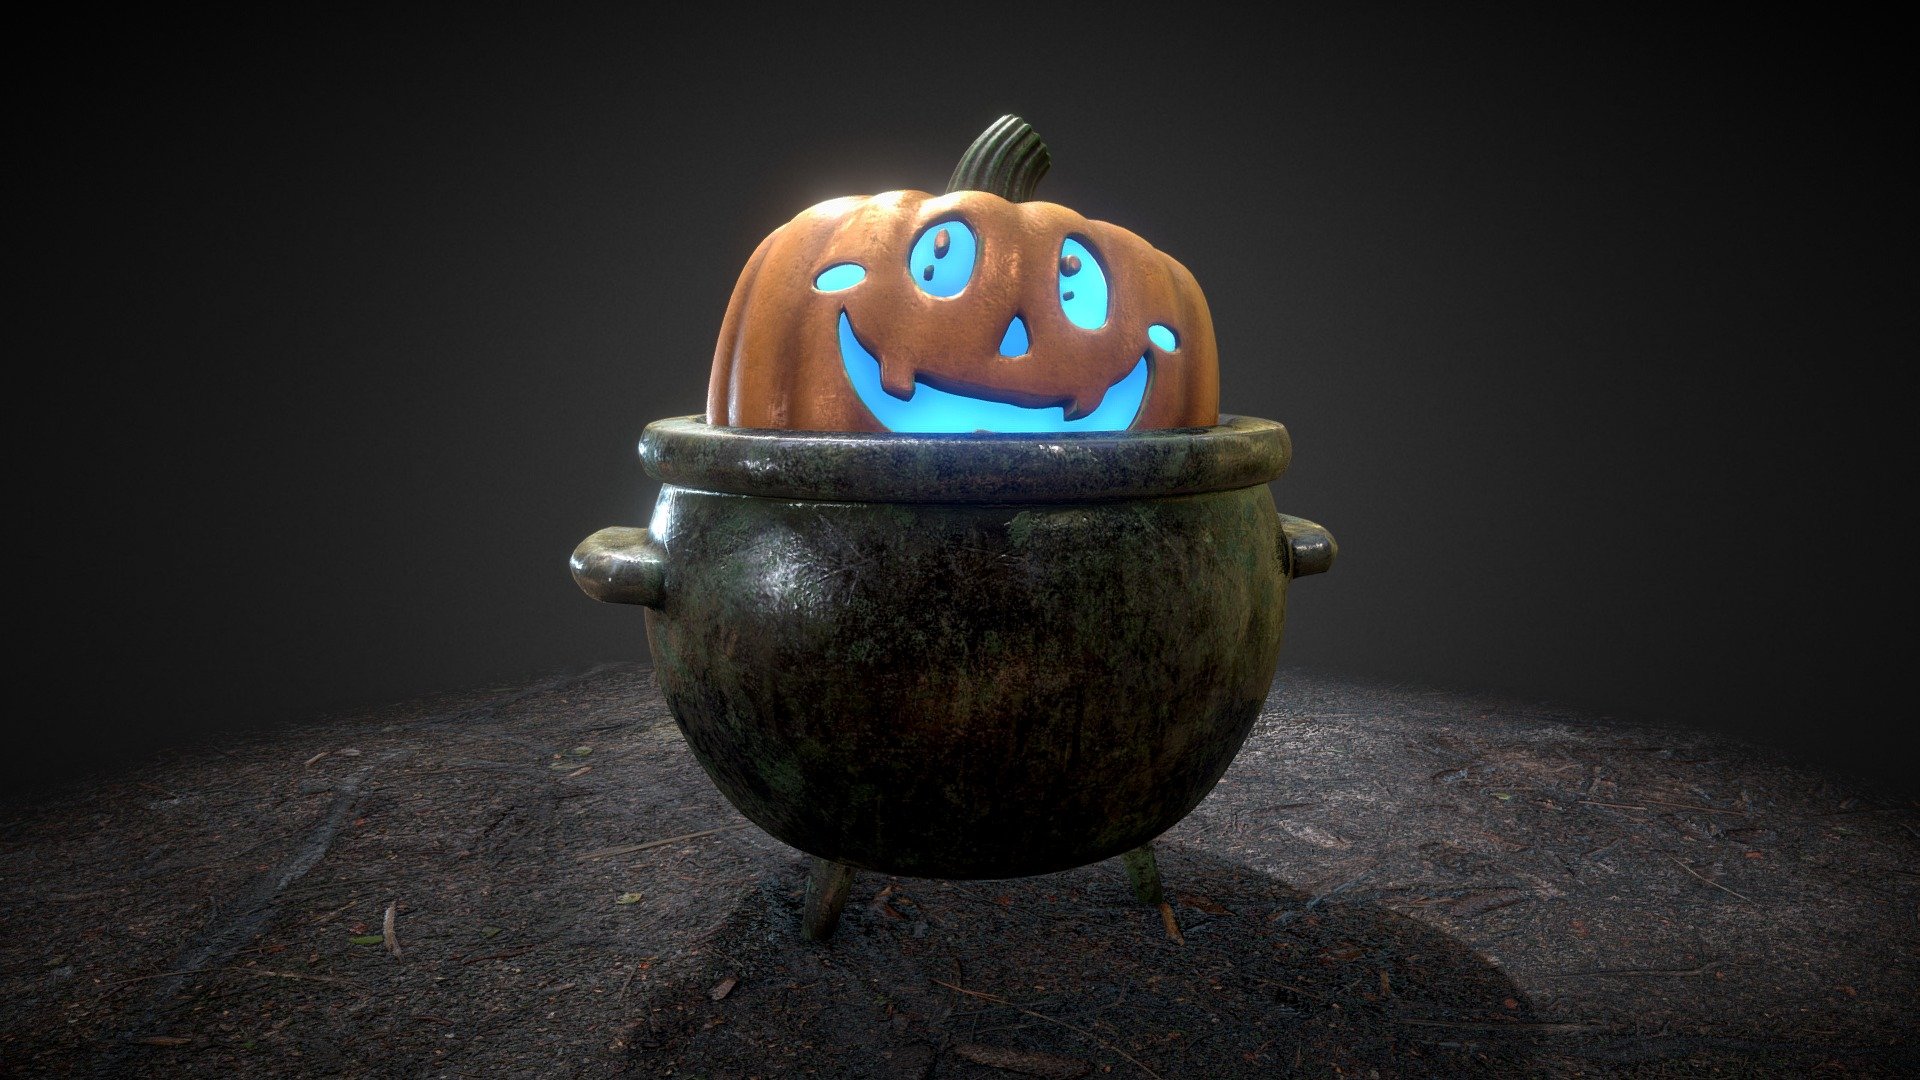 Baby Pumpkin asset for my baby's gender reveal party over the Halloween :) - Baby Pumpkin - 3D model by Tony Pinrut (@Apinrt) 3d model